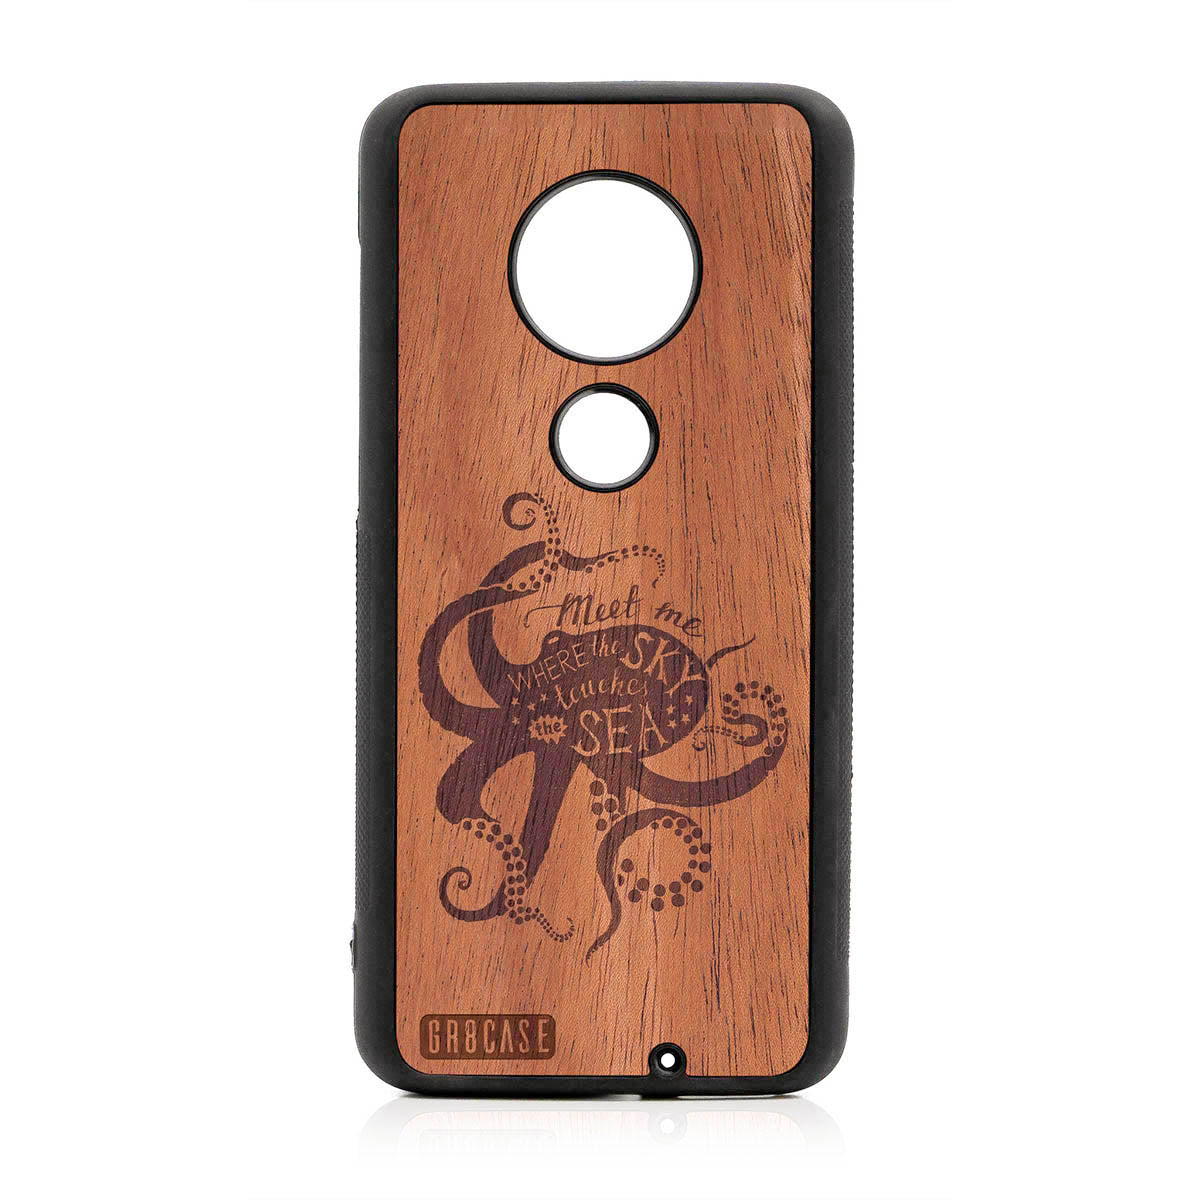 Meet Me Where The Sky Touches The Sea (Octopus) Design Wood Case For Moto G7 Plus